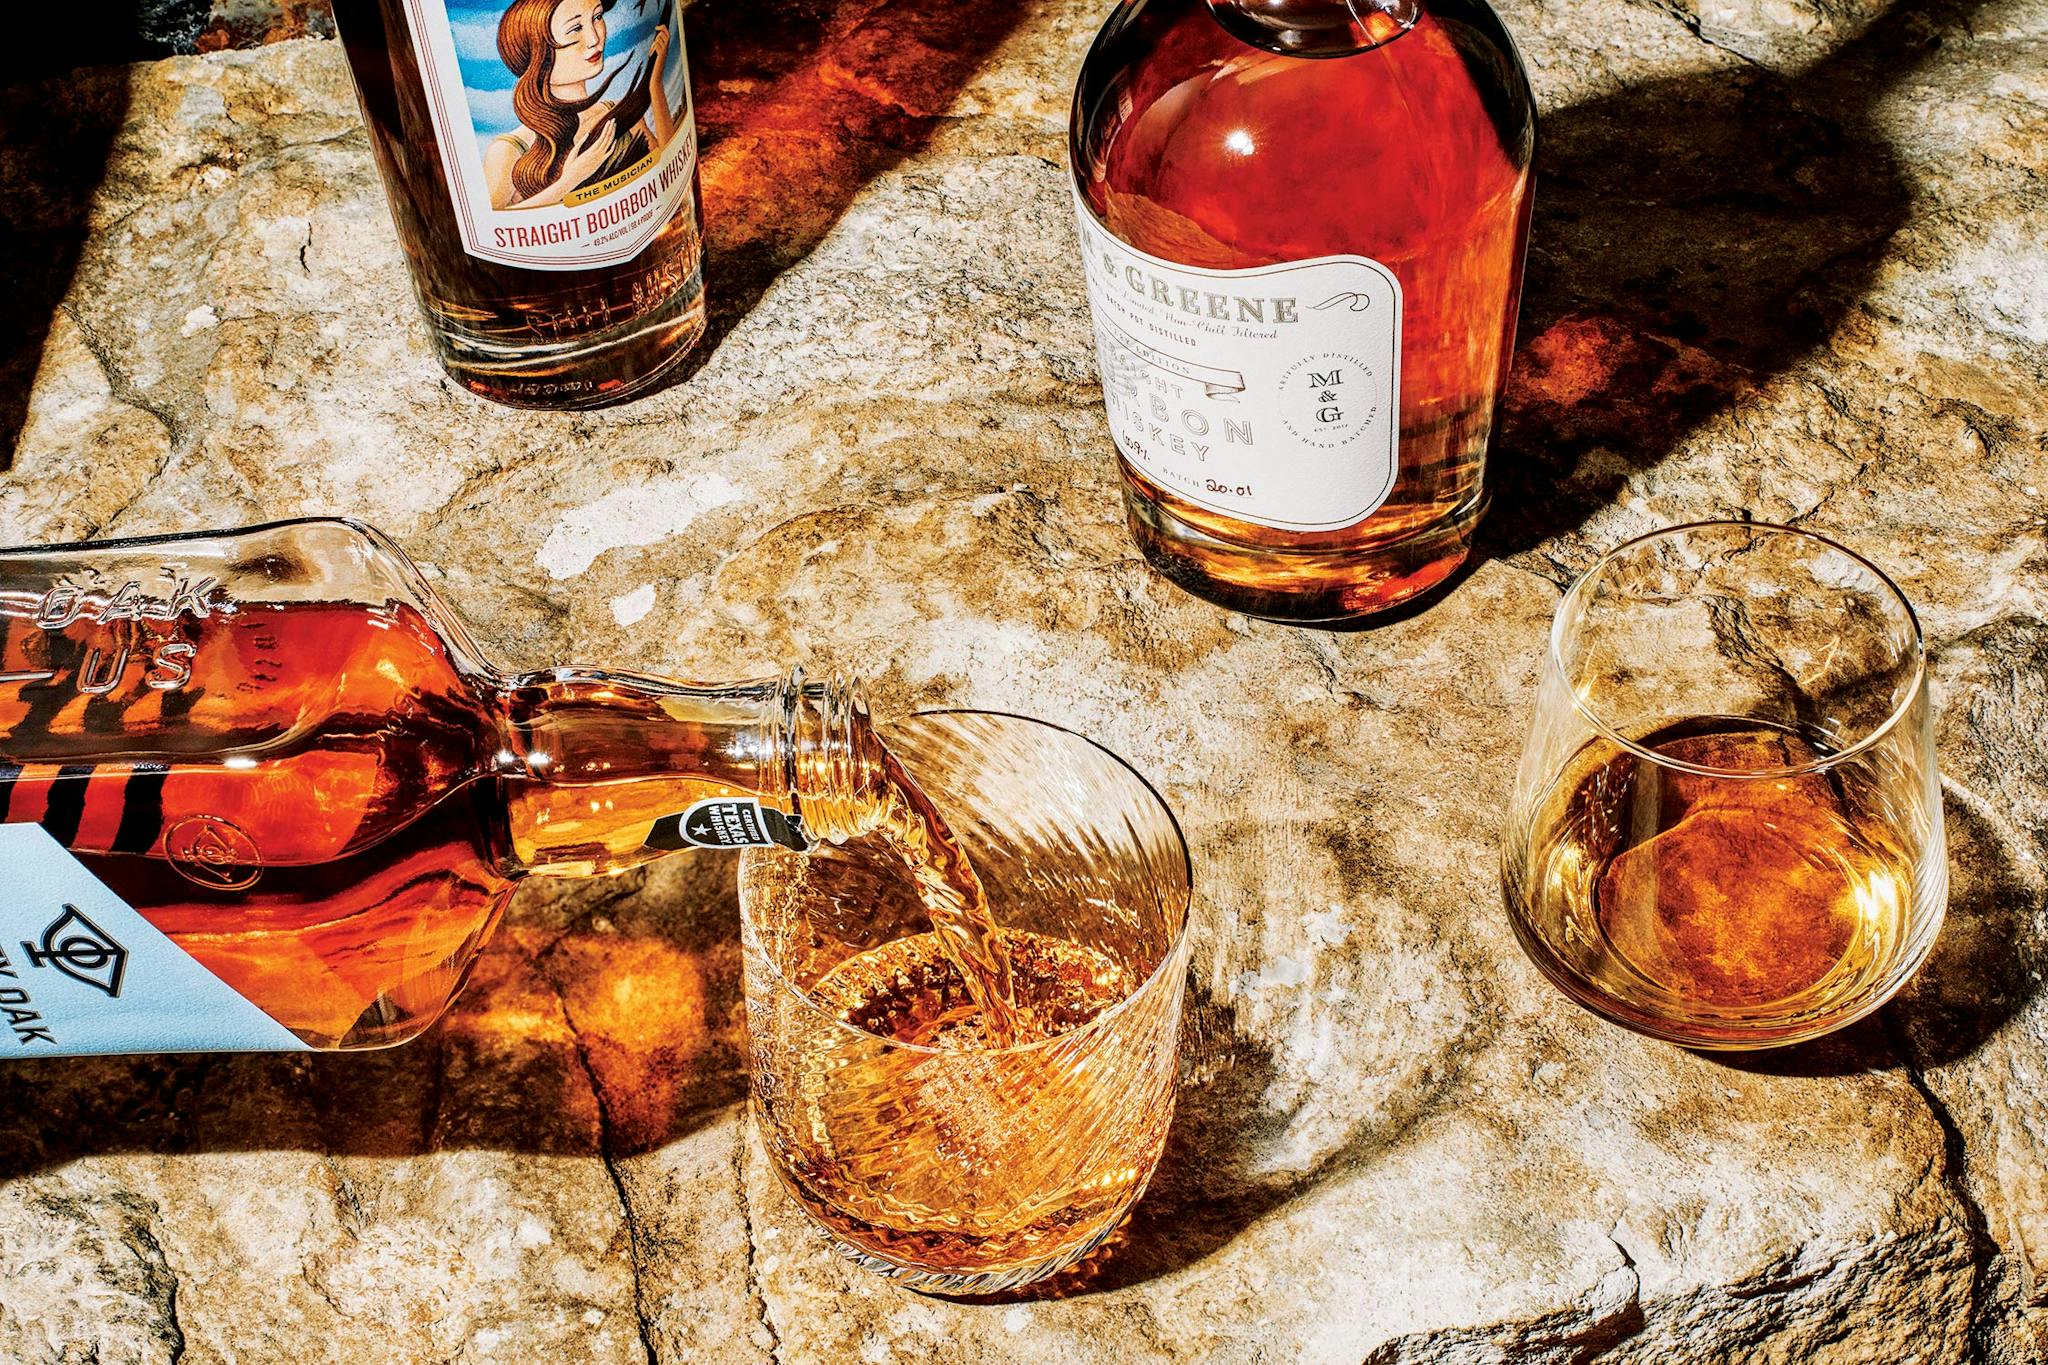 These new grain-to-glass bourbon releases are proof that the state’s still-young whiskey industry is developing a bold regional profile.